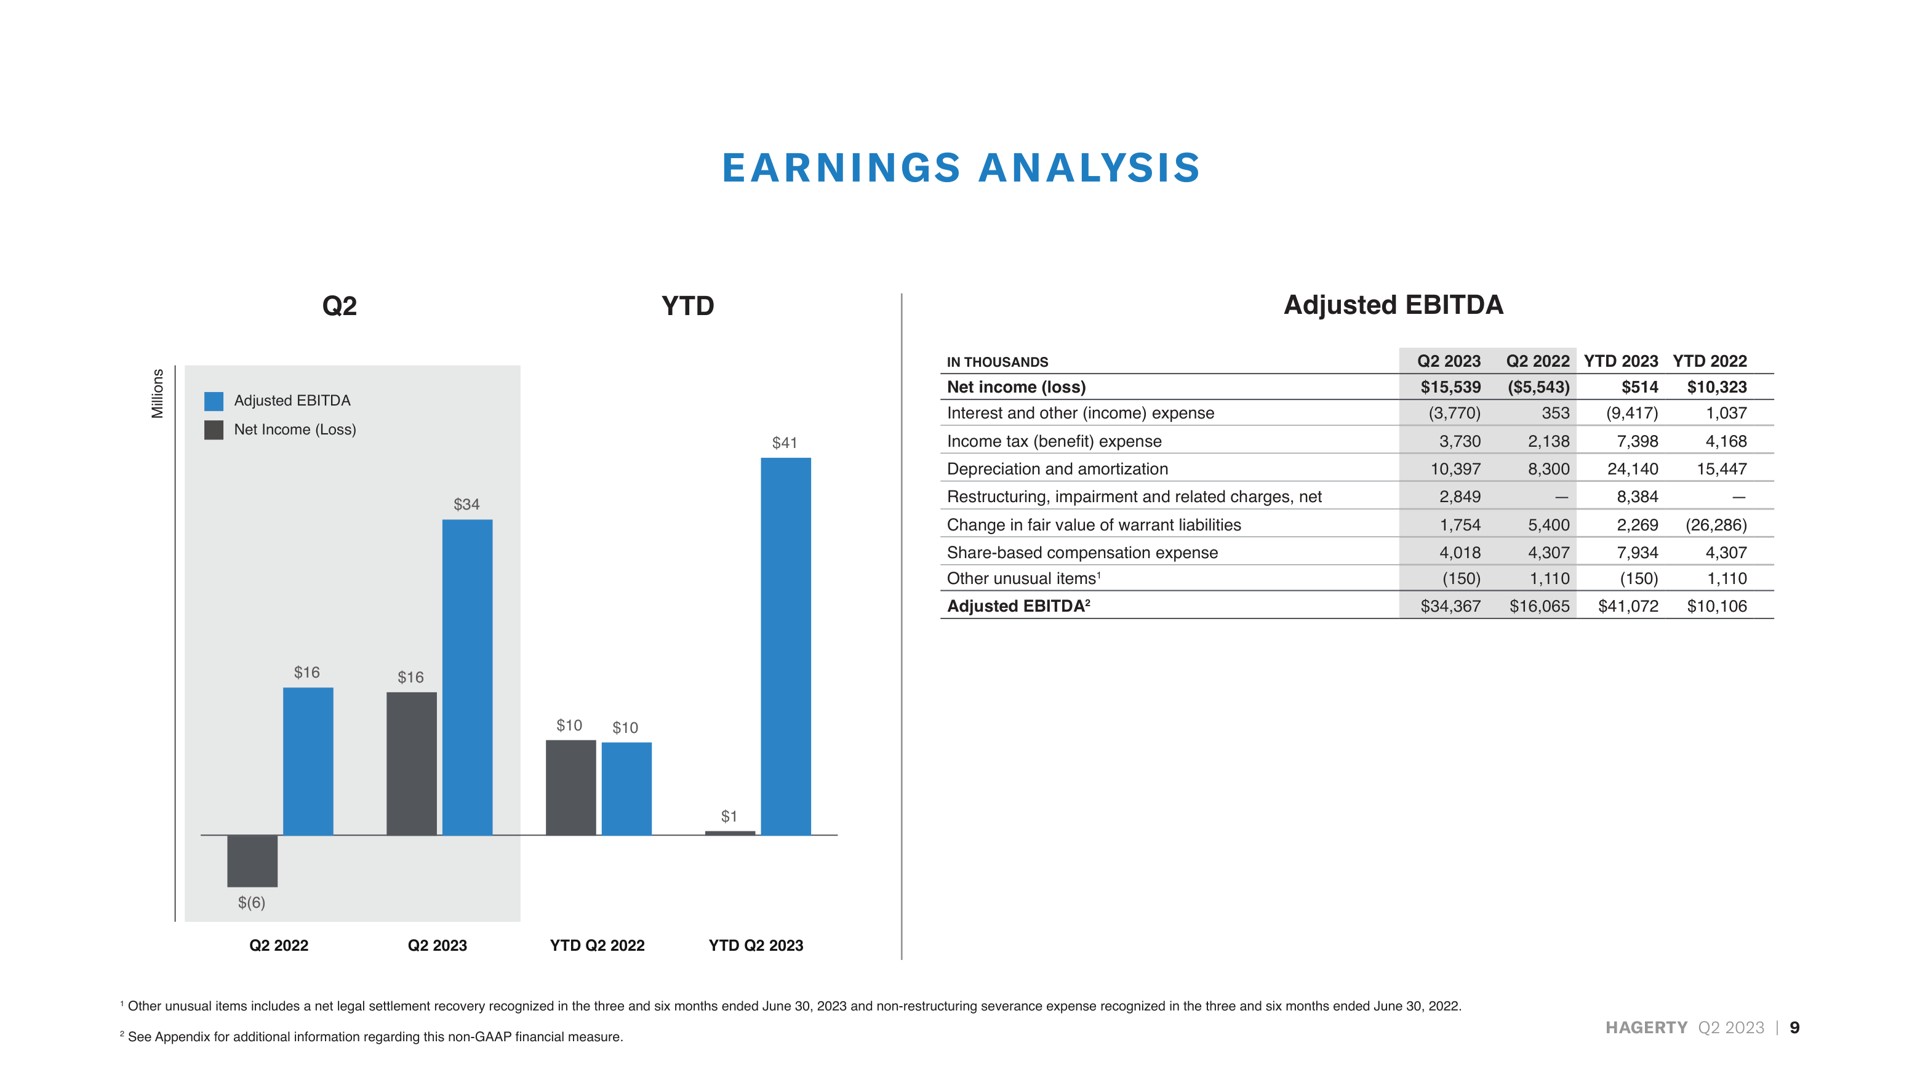 a in ana lysis earnings analysis | Hagerty